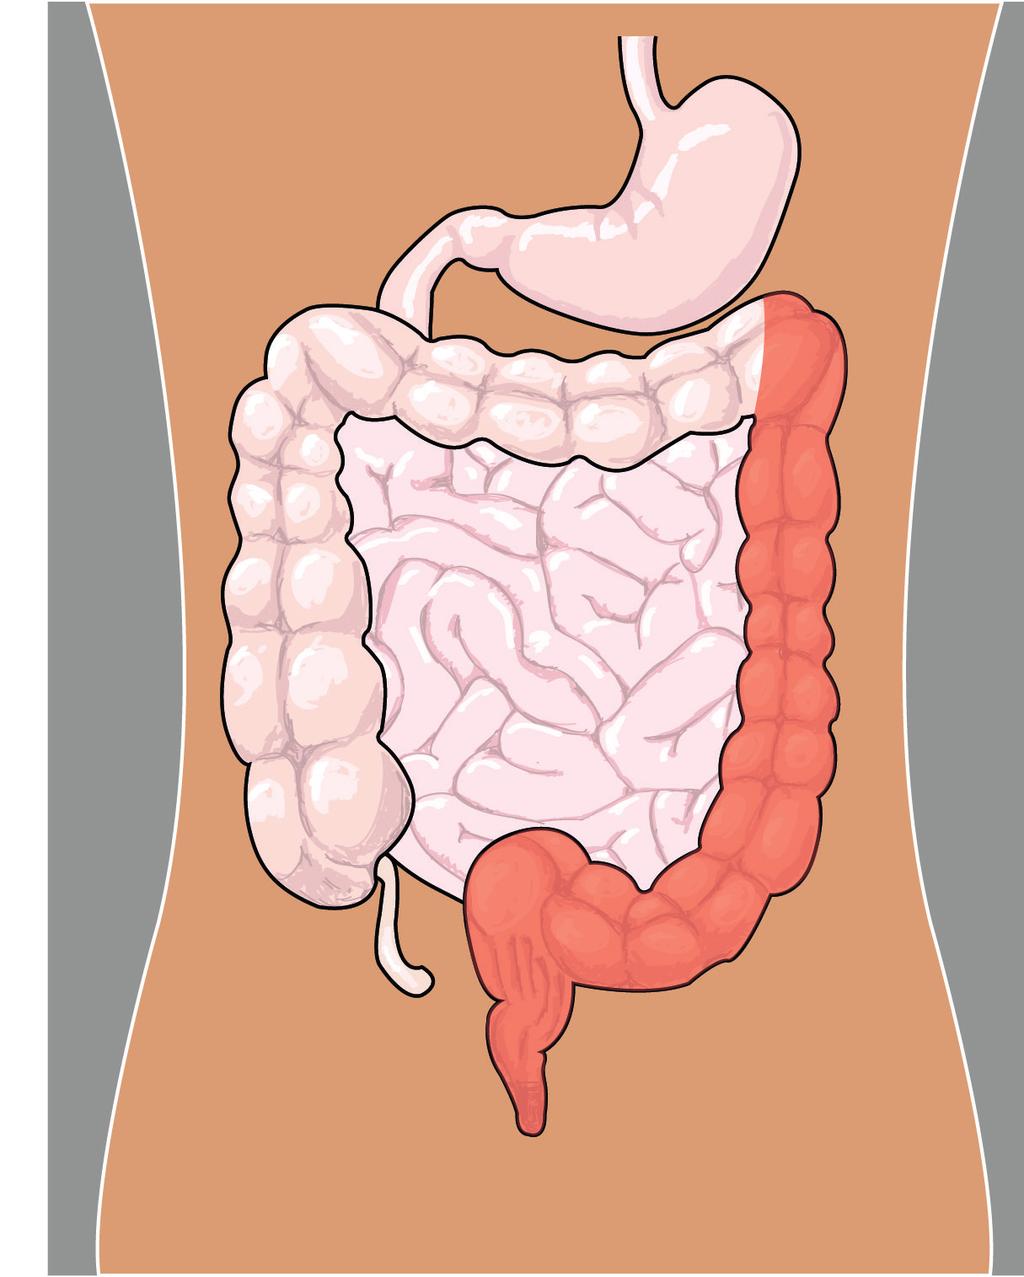 What is a gastroscopy? It is an examination of the inside of your oesophagus (gullet), the stomach, and the duodenum (the first bend of the small intestine). See the diagram.